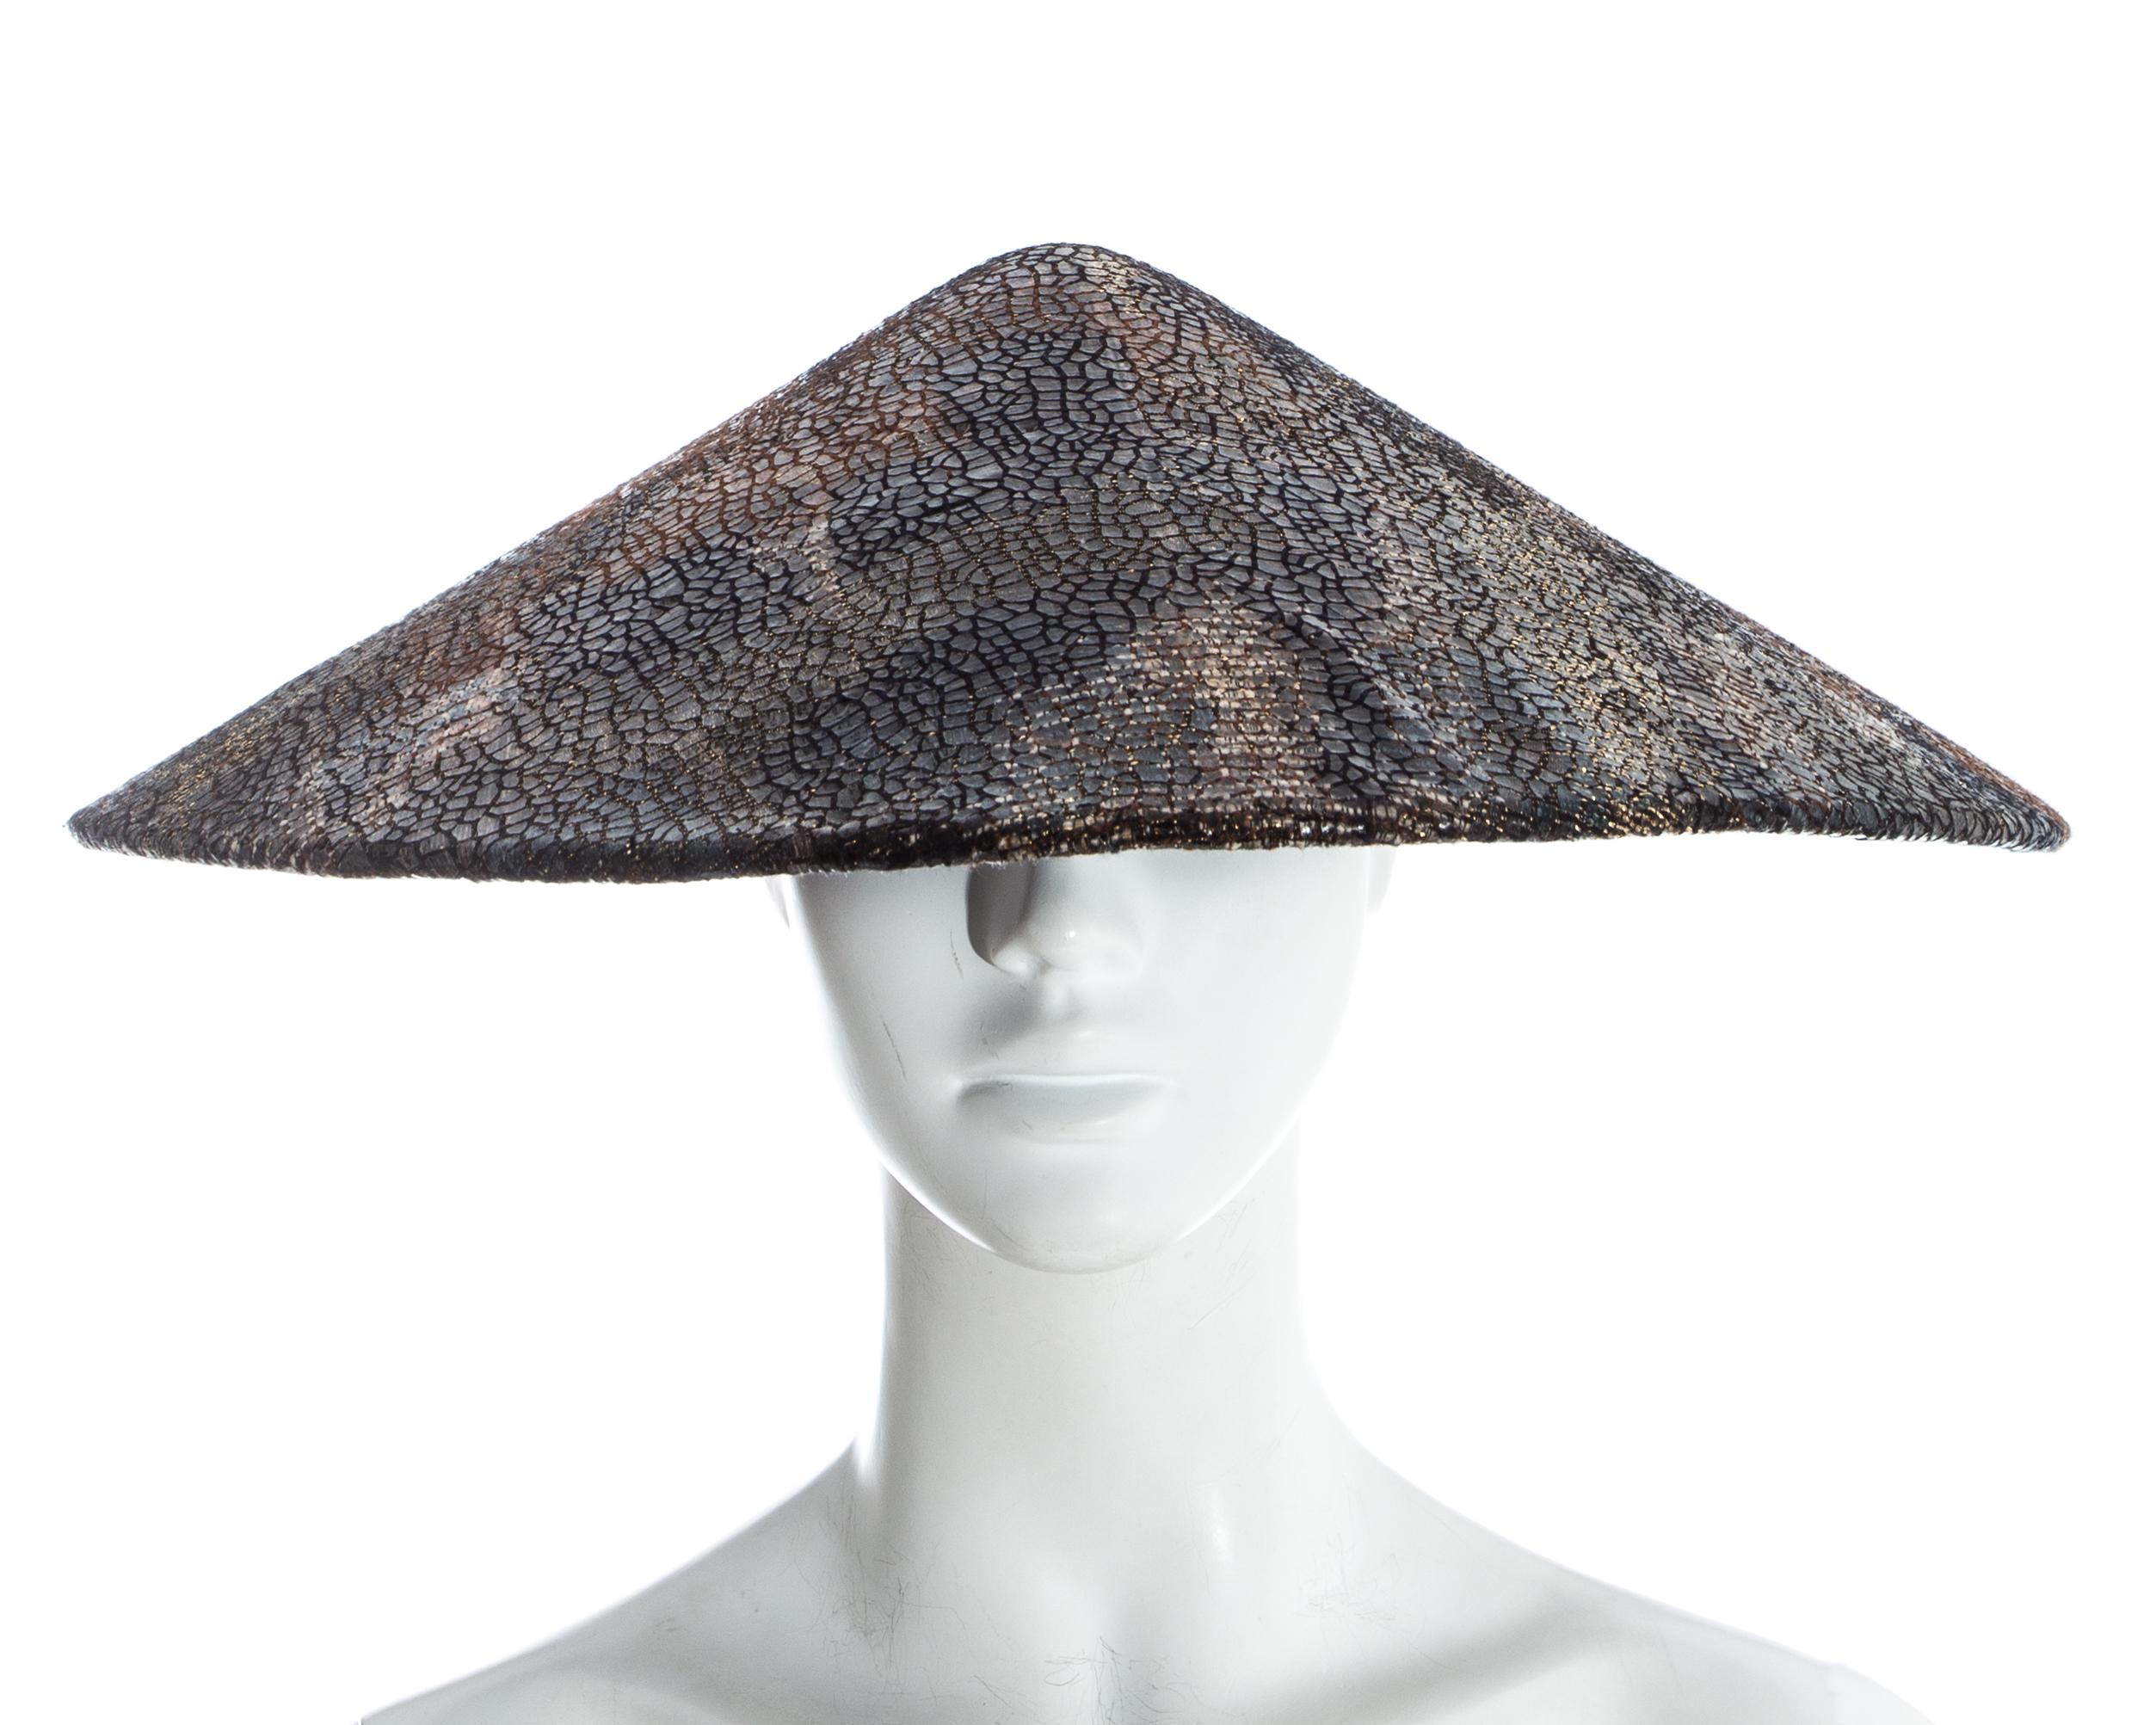 Chanel by Karl Lagerfeld, 'Paris-Shangai' bronze sequin conical hat, pf 2010 In Excellent Condition For Sale In London, London